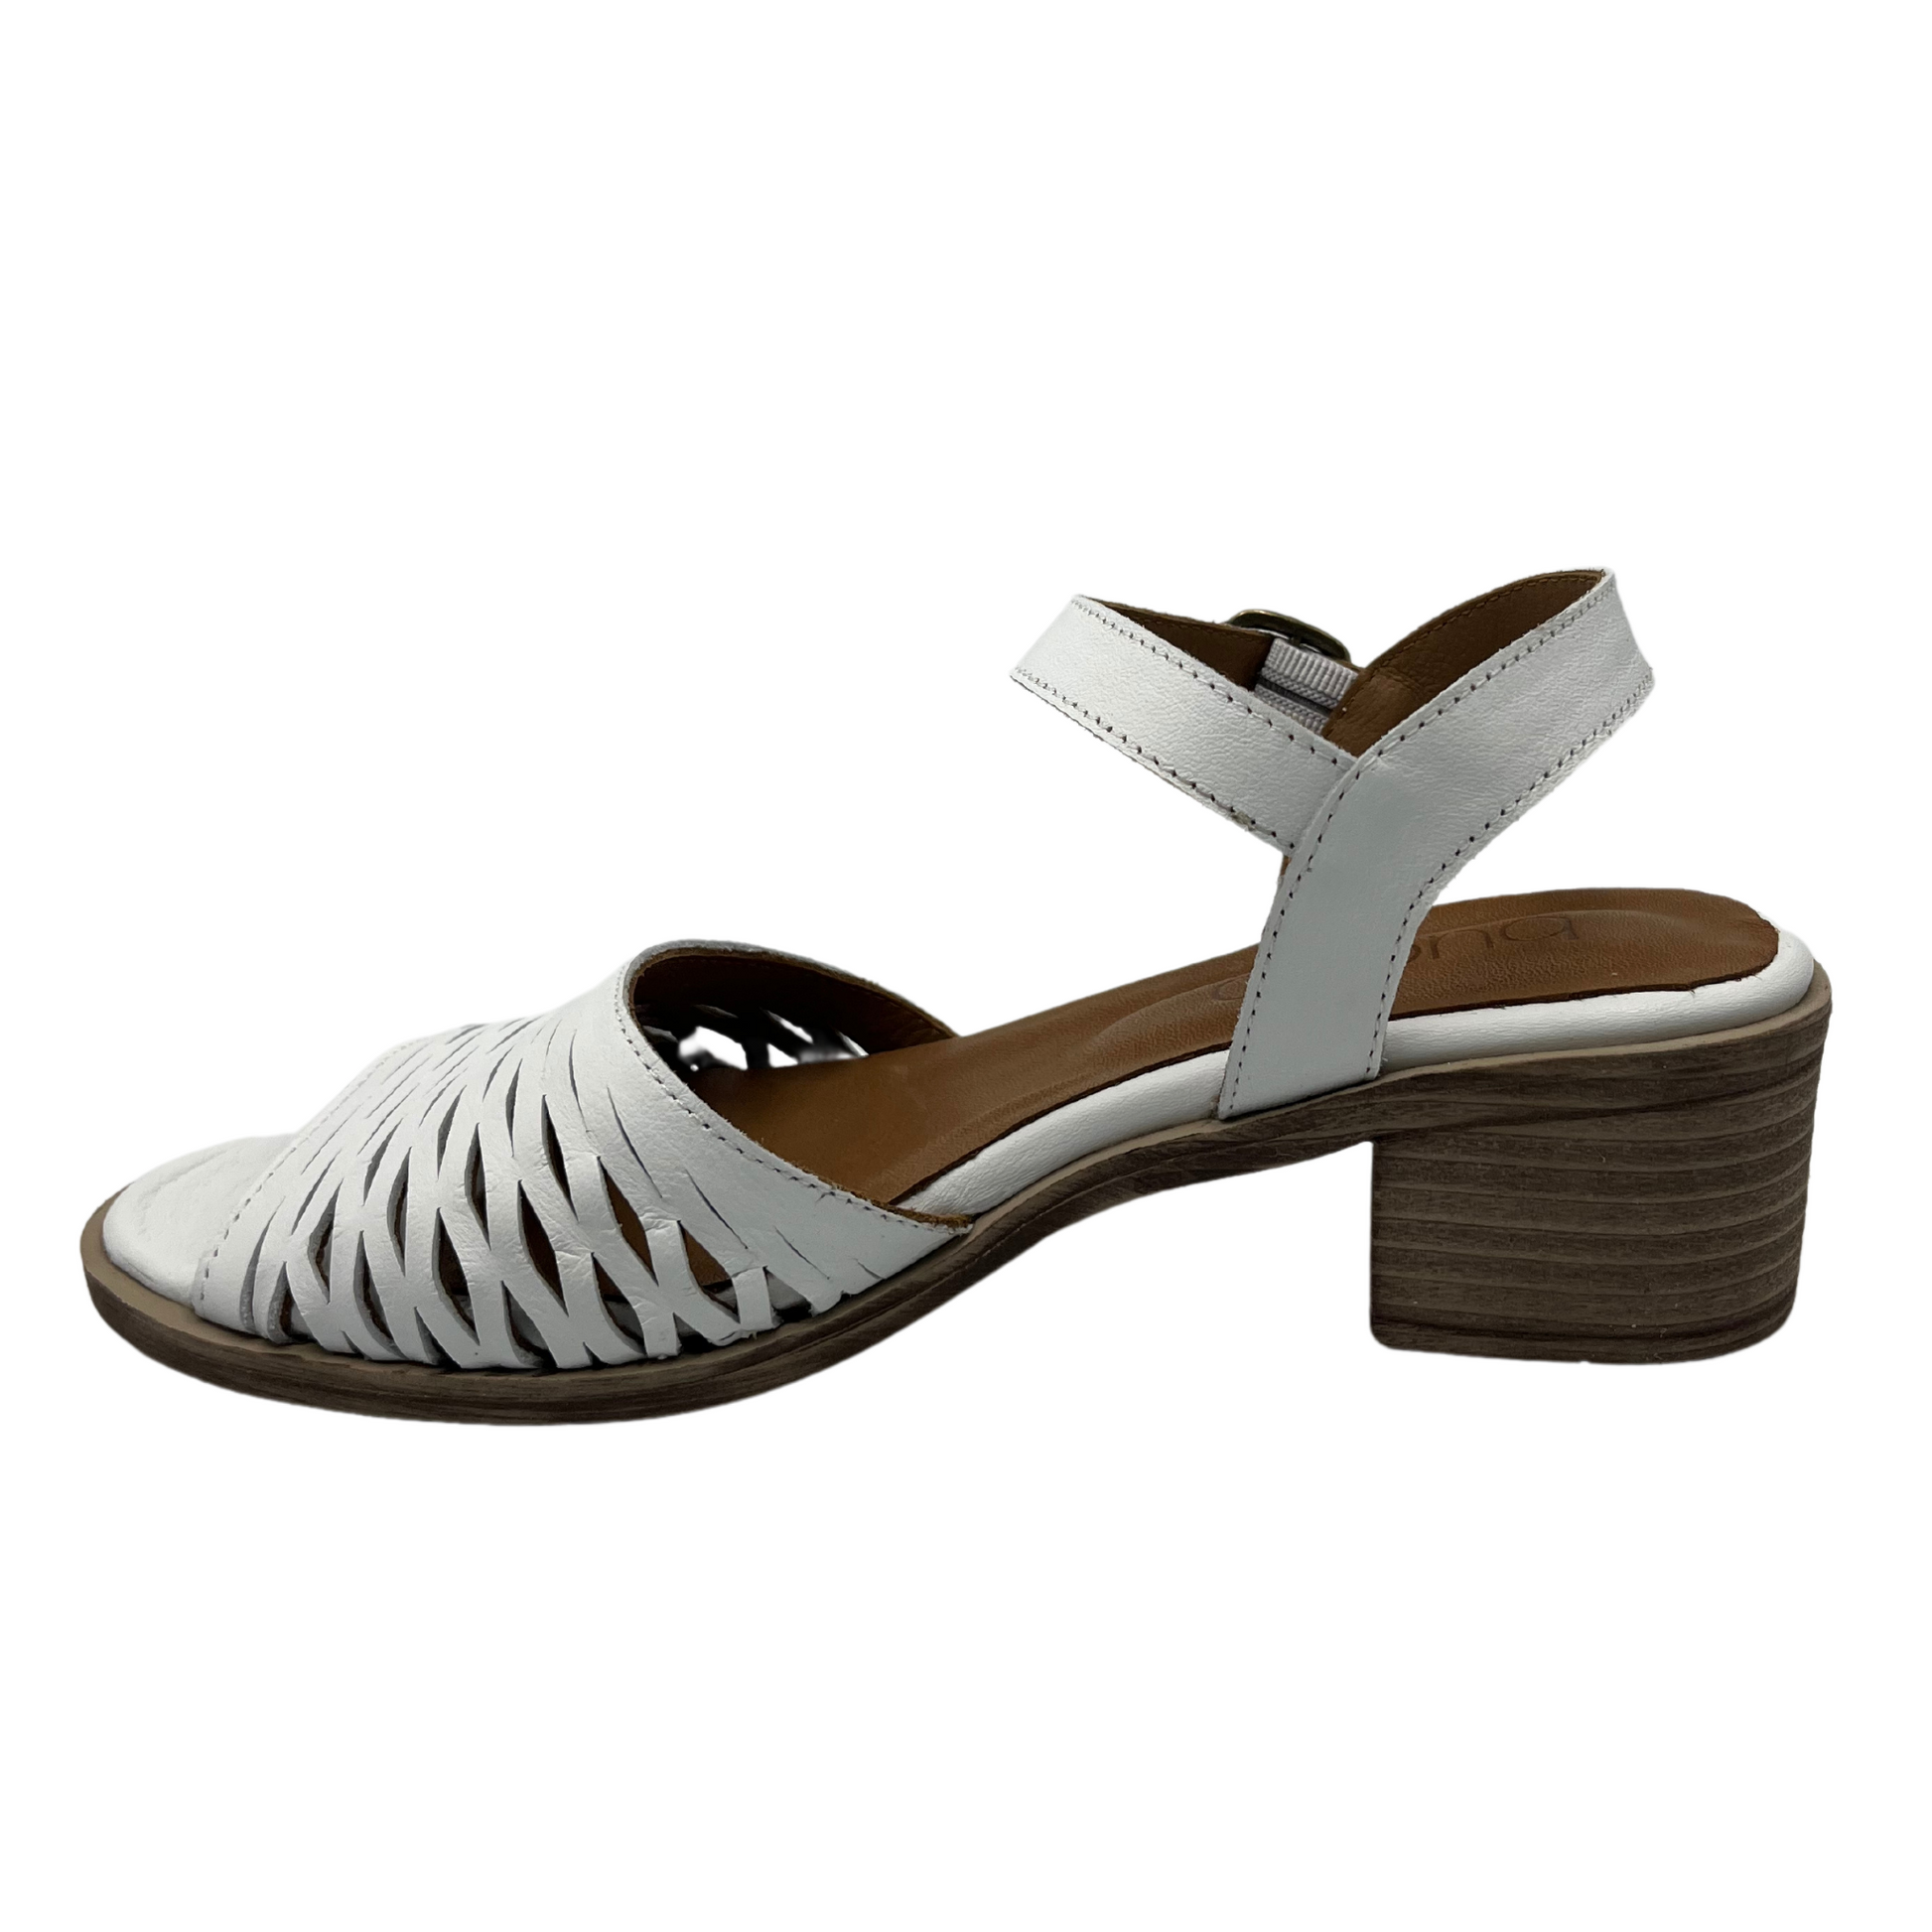 Left facing view of white leather sandal with stacked heel and cutout details on upper